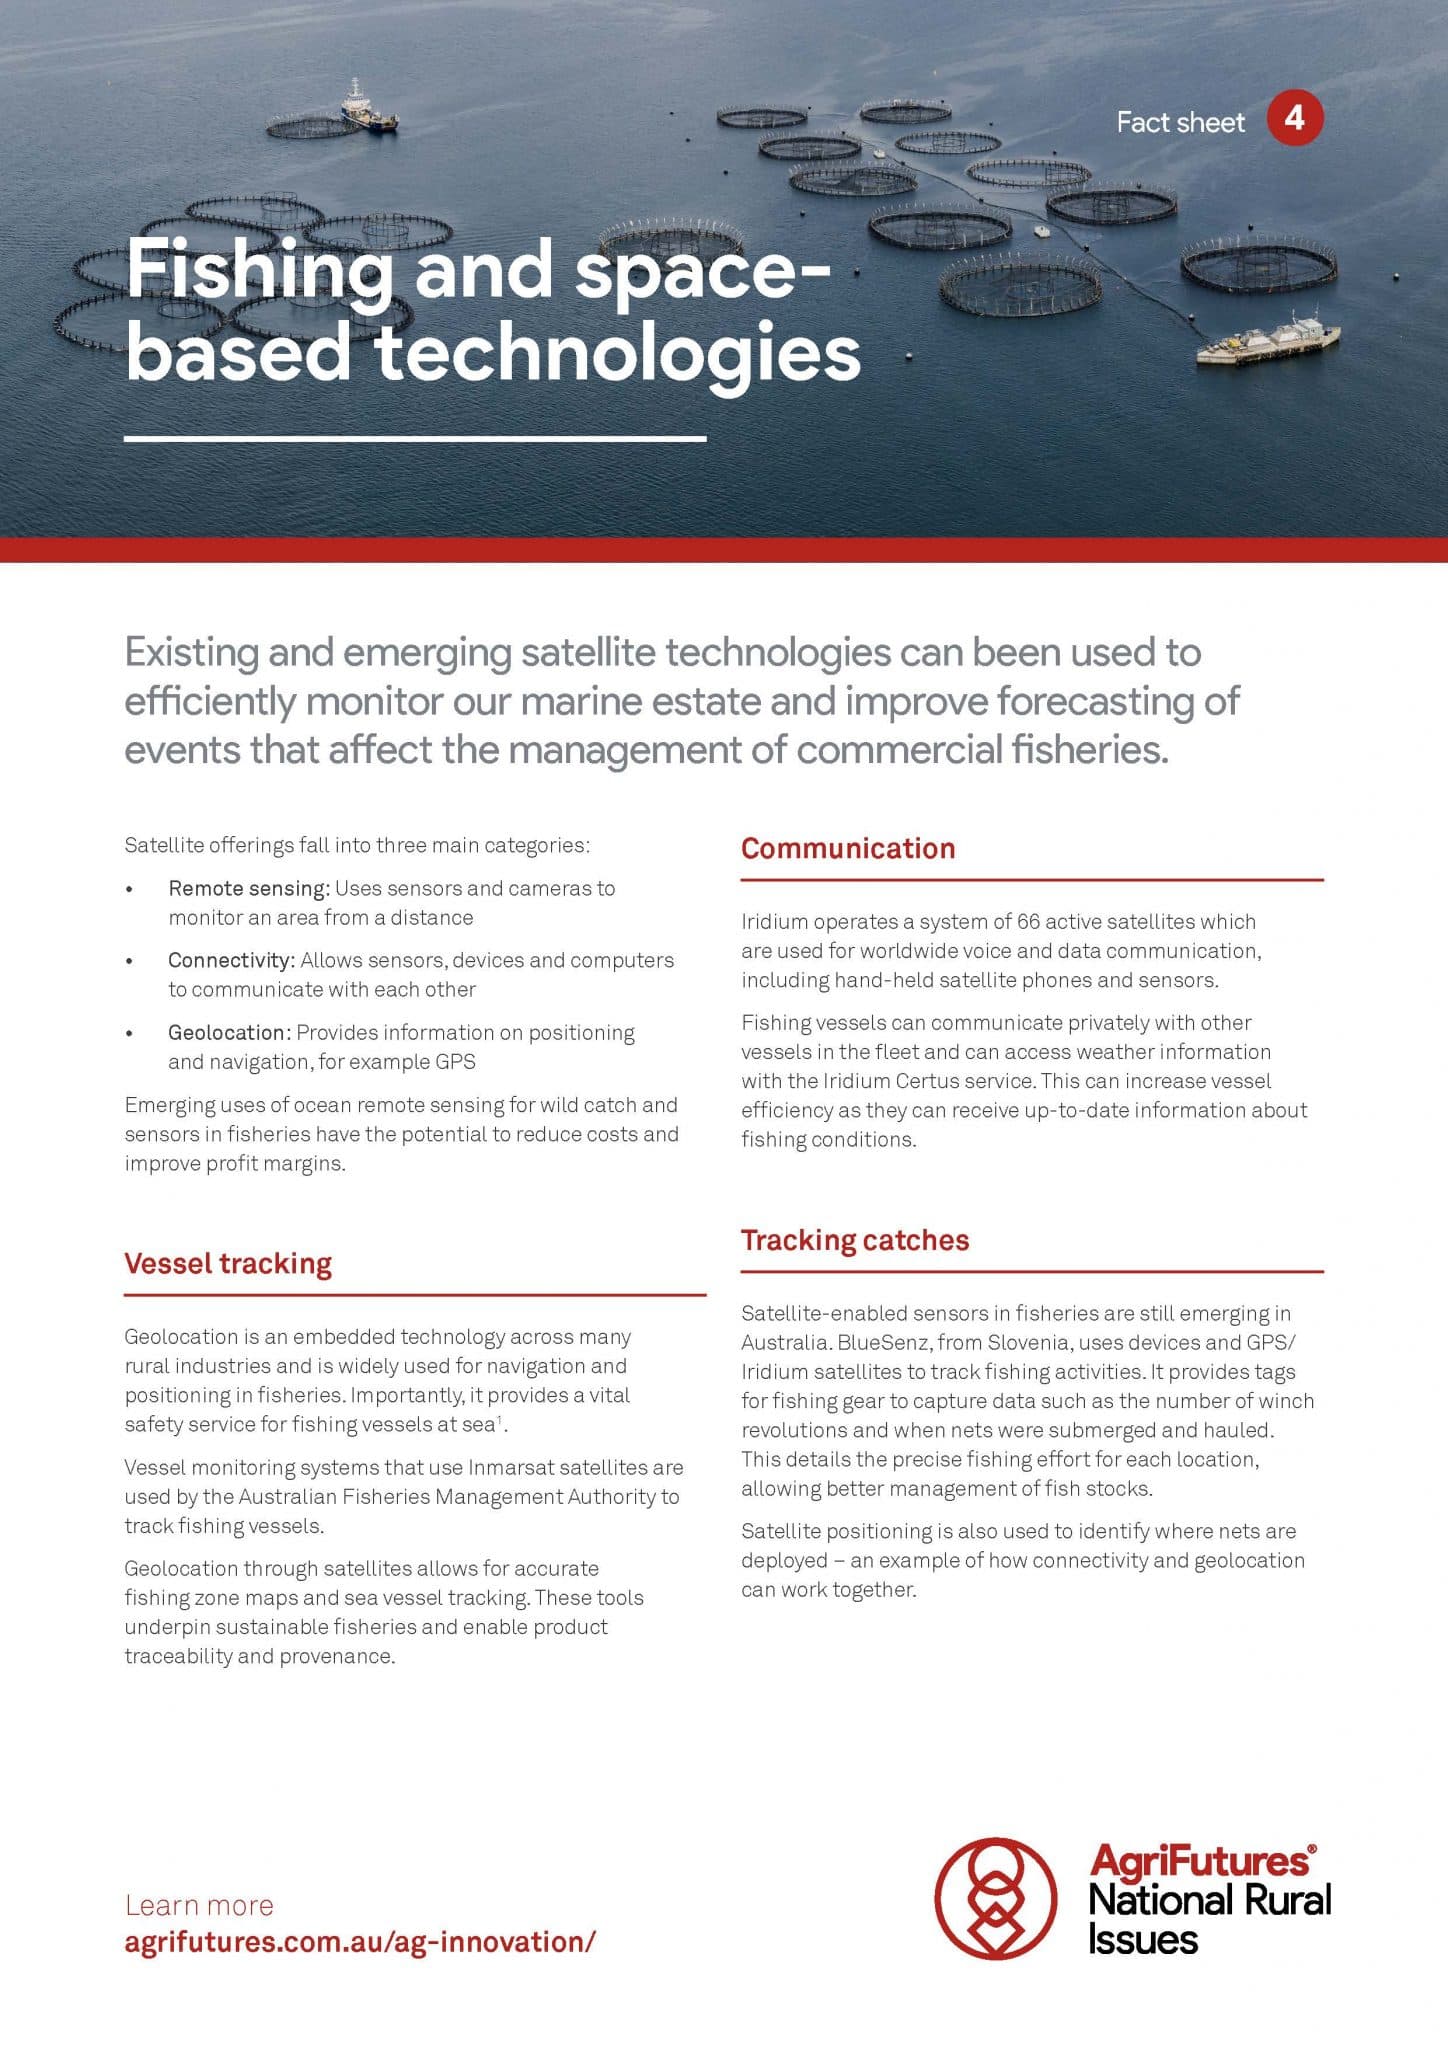 Fact sheet: Fishing and space-based technologies - image